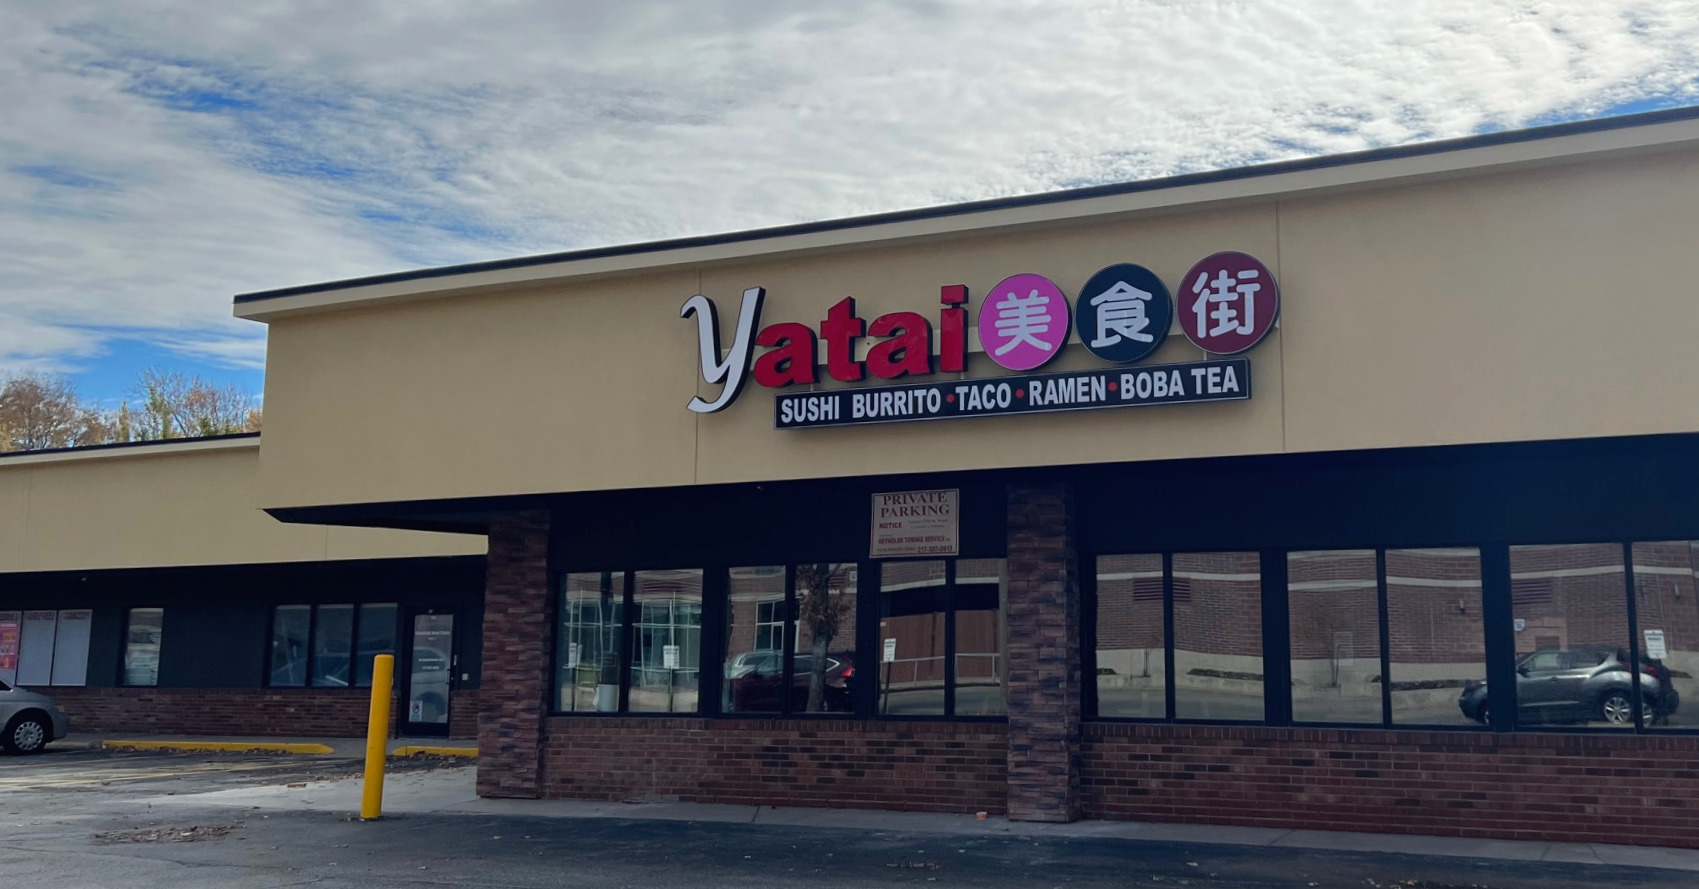 The exterior of the new restaurant Yatai on University Avenue in Champaign, Illinois.